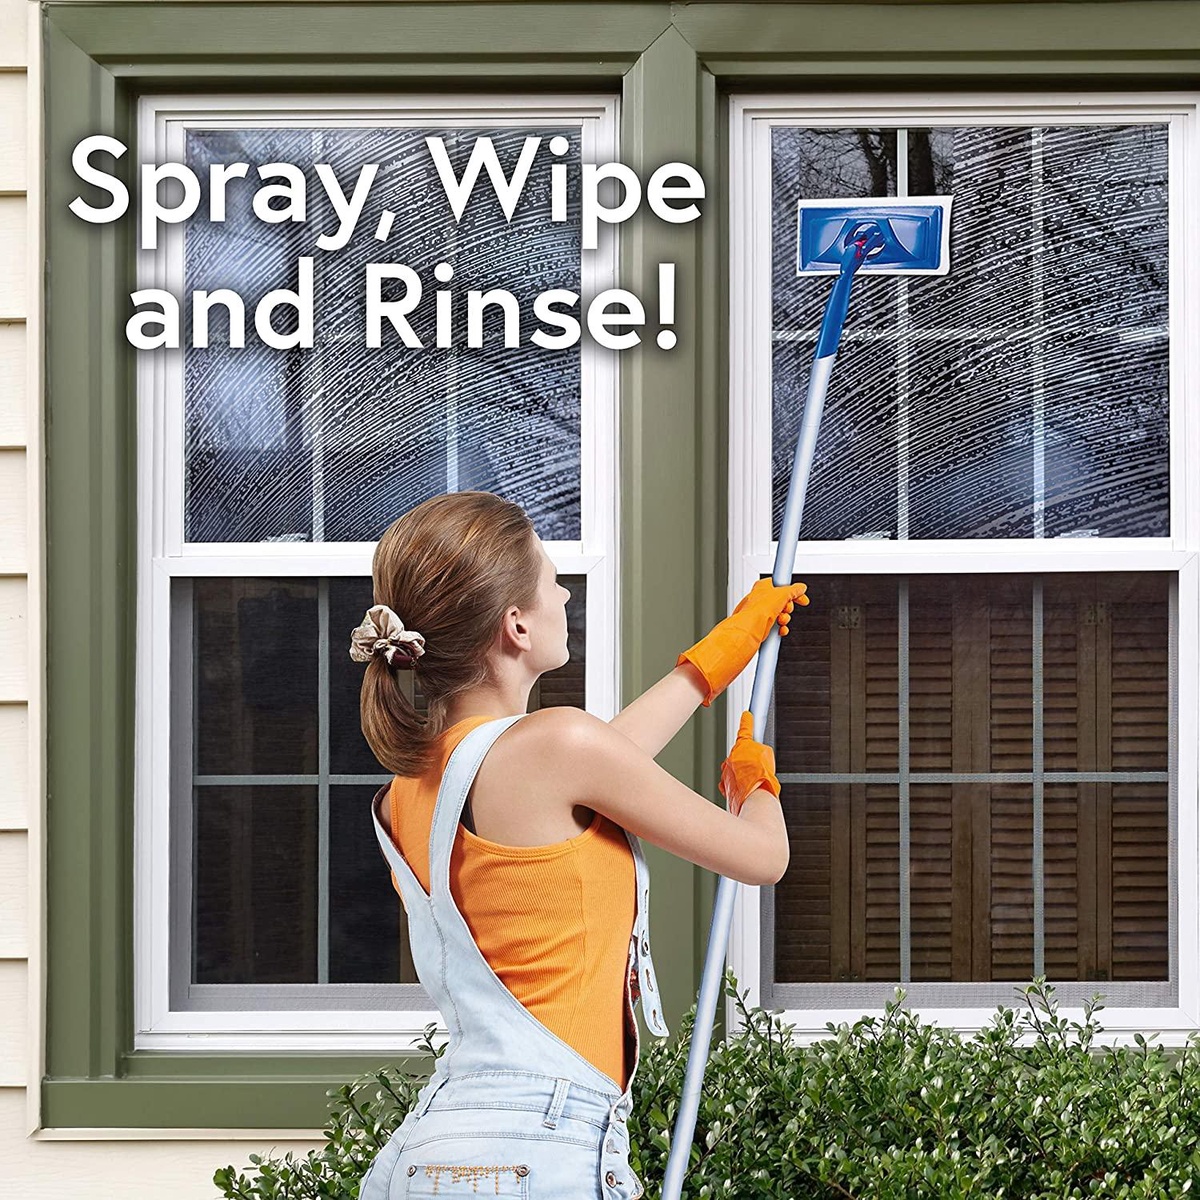 Crystal Clear: A Comprehensive Guide to Window Cleaning Tools